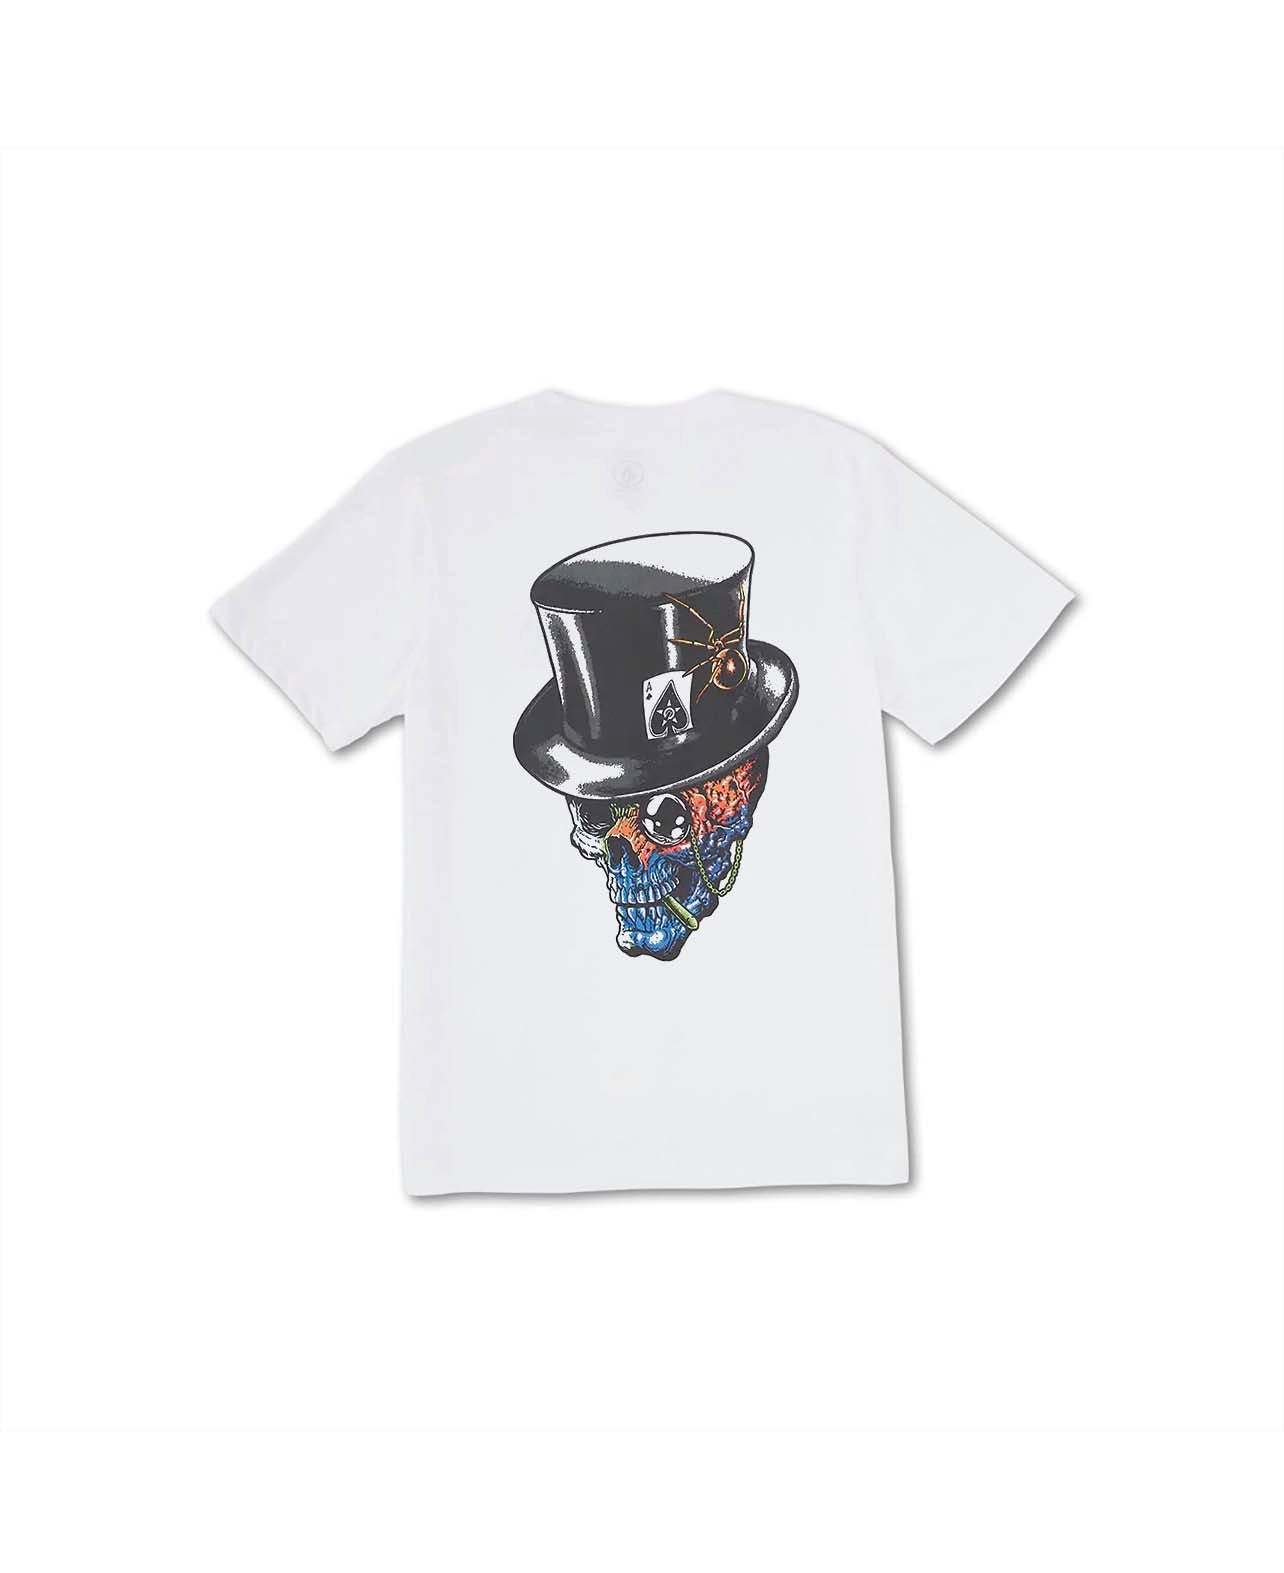 Unit Ace card t-shirt in white